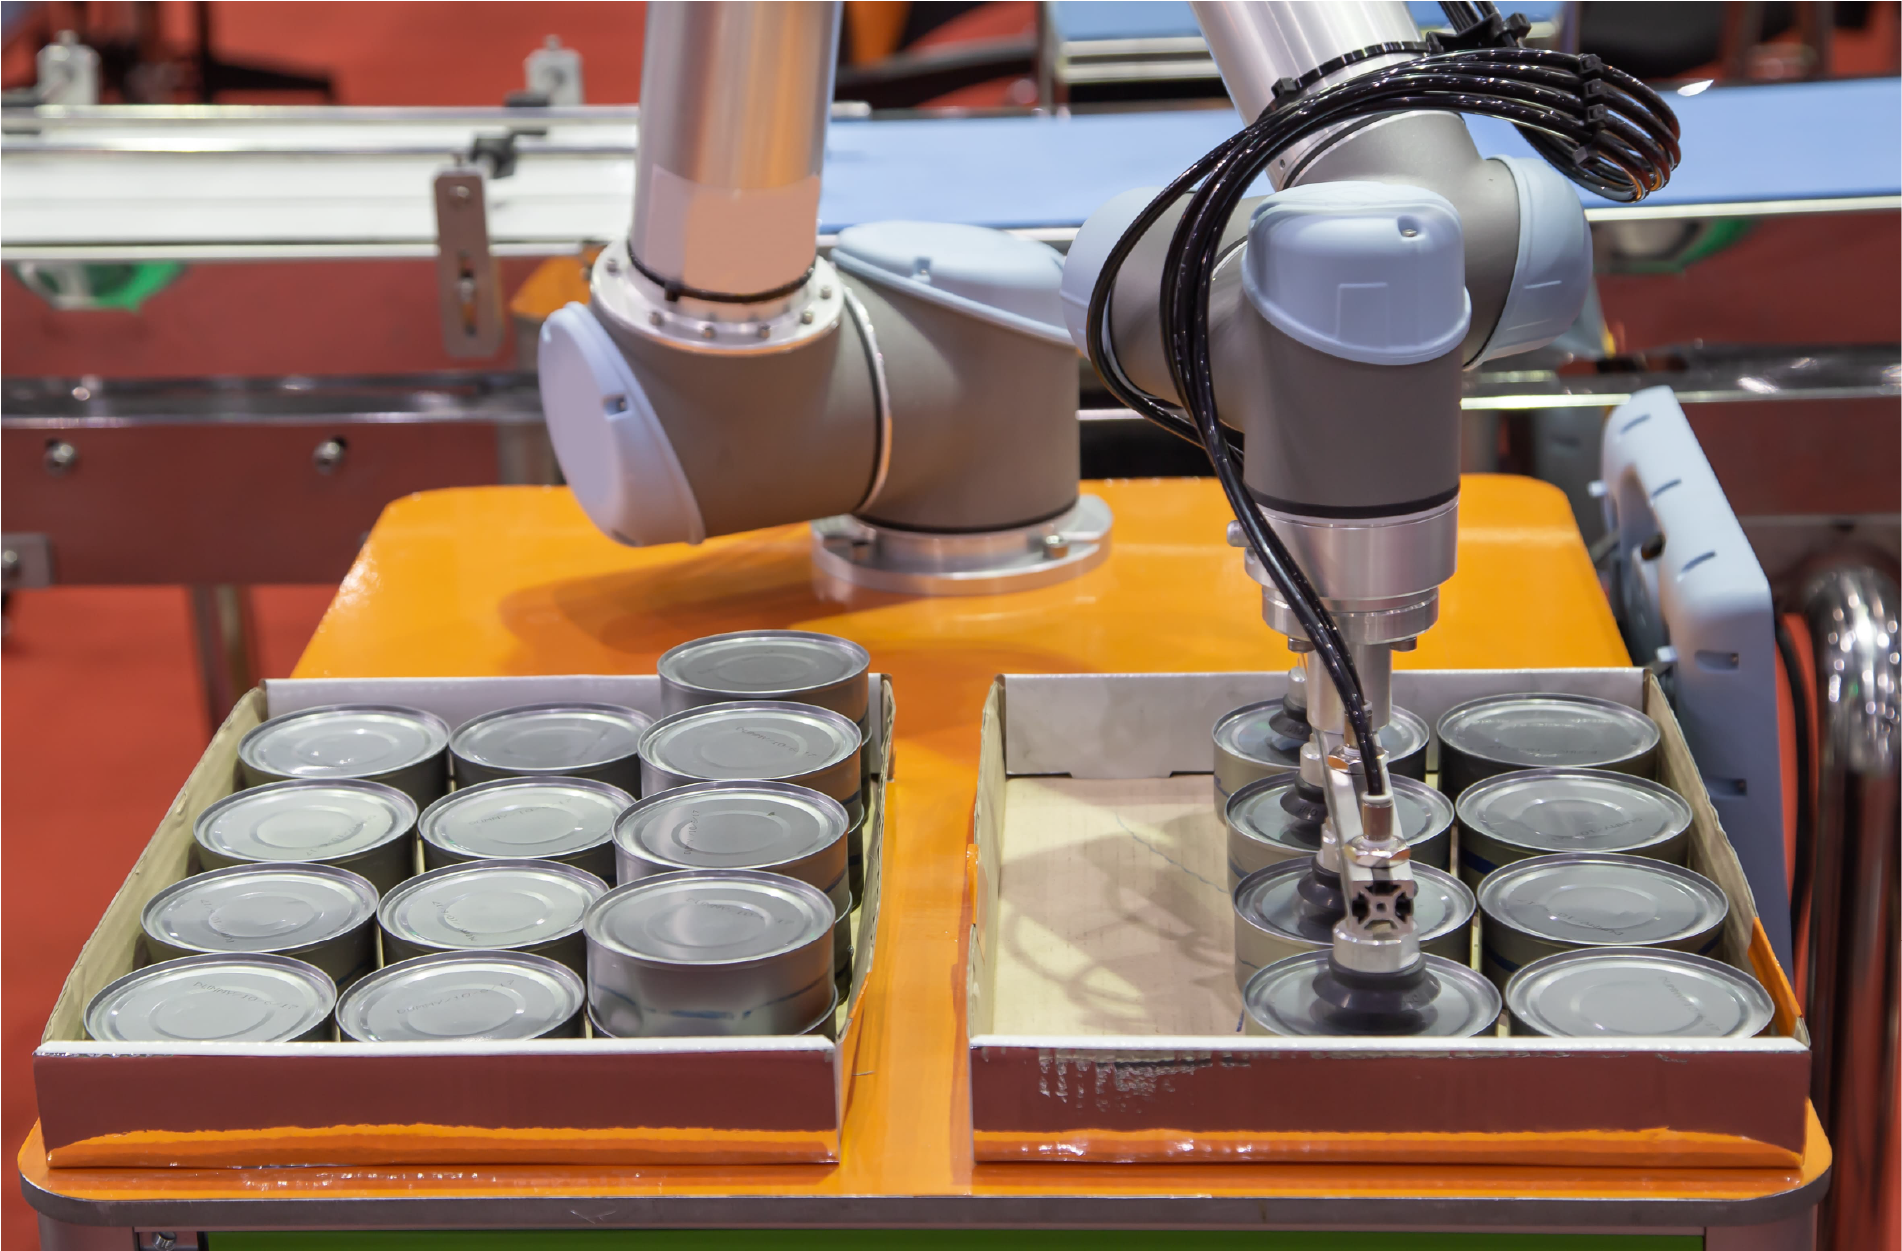 pick and place tin cans on a production line using a UR robot arm